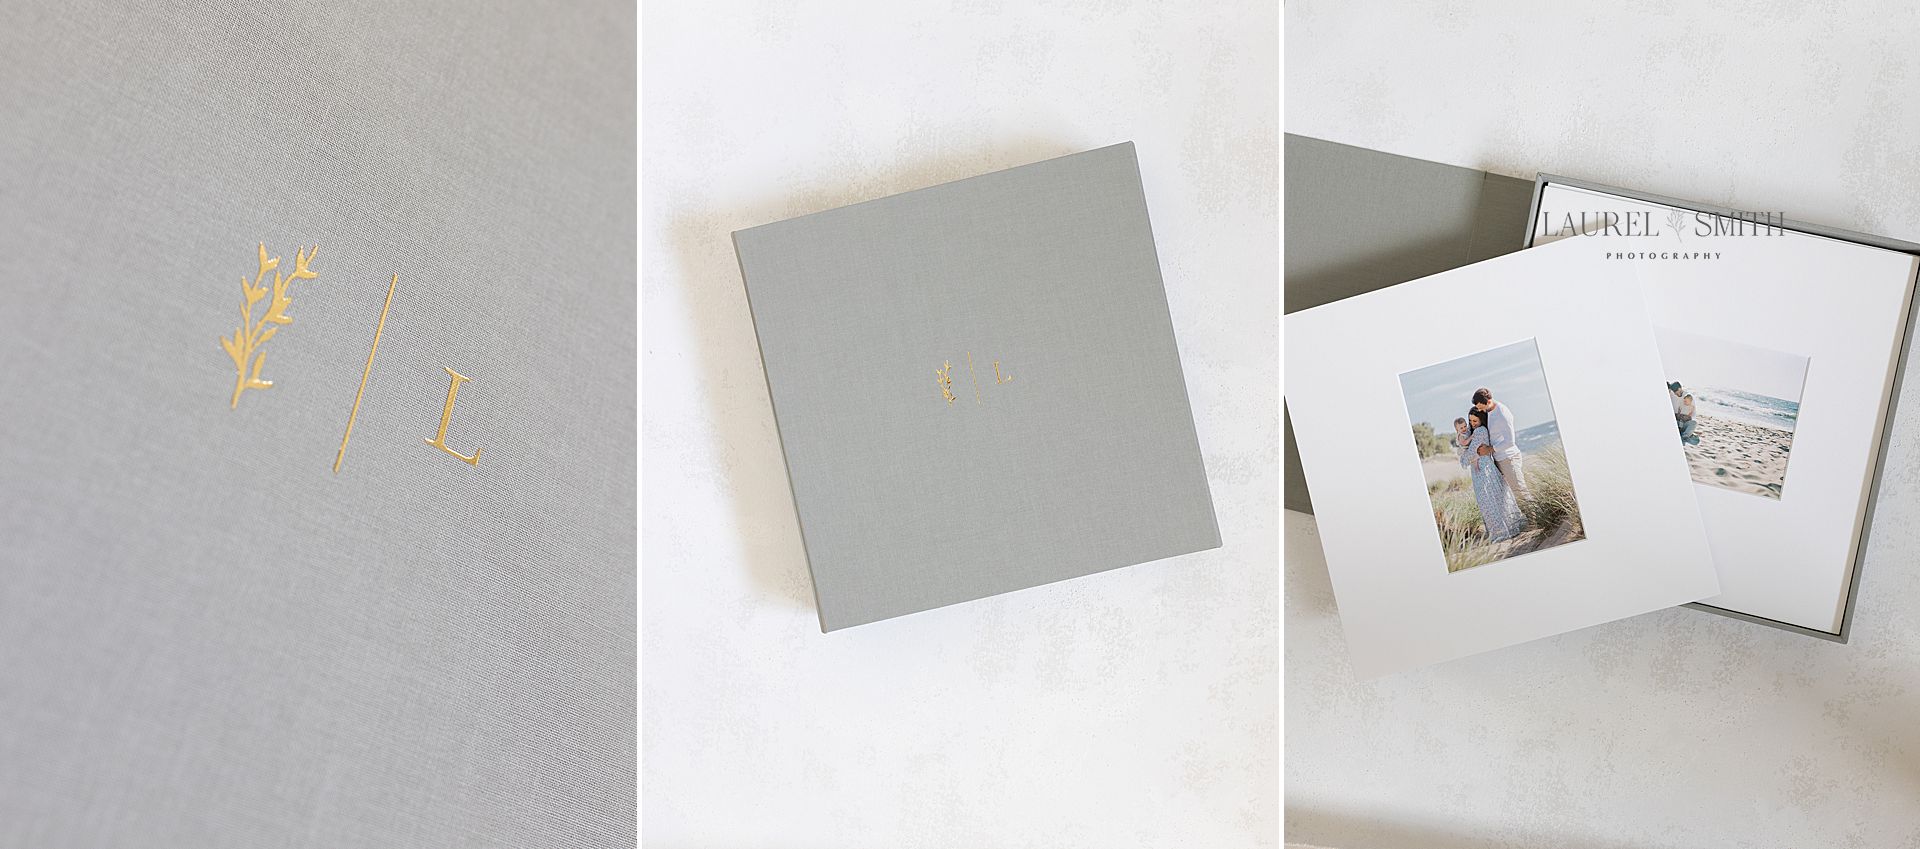 Three images showing details of gold embossing on folio box, full folio box, and matted prints inside of folio box.